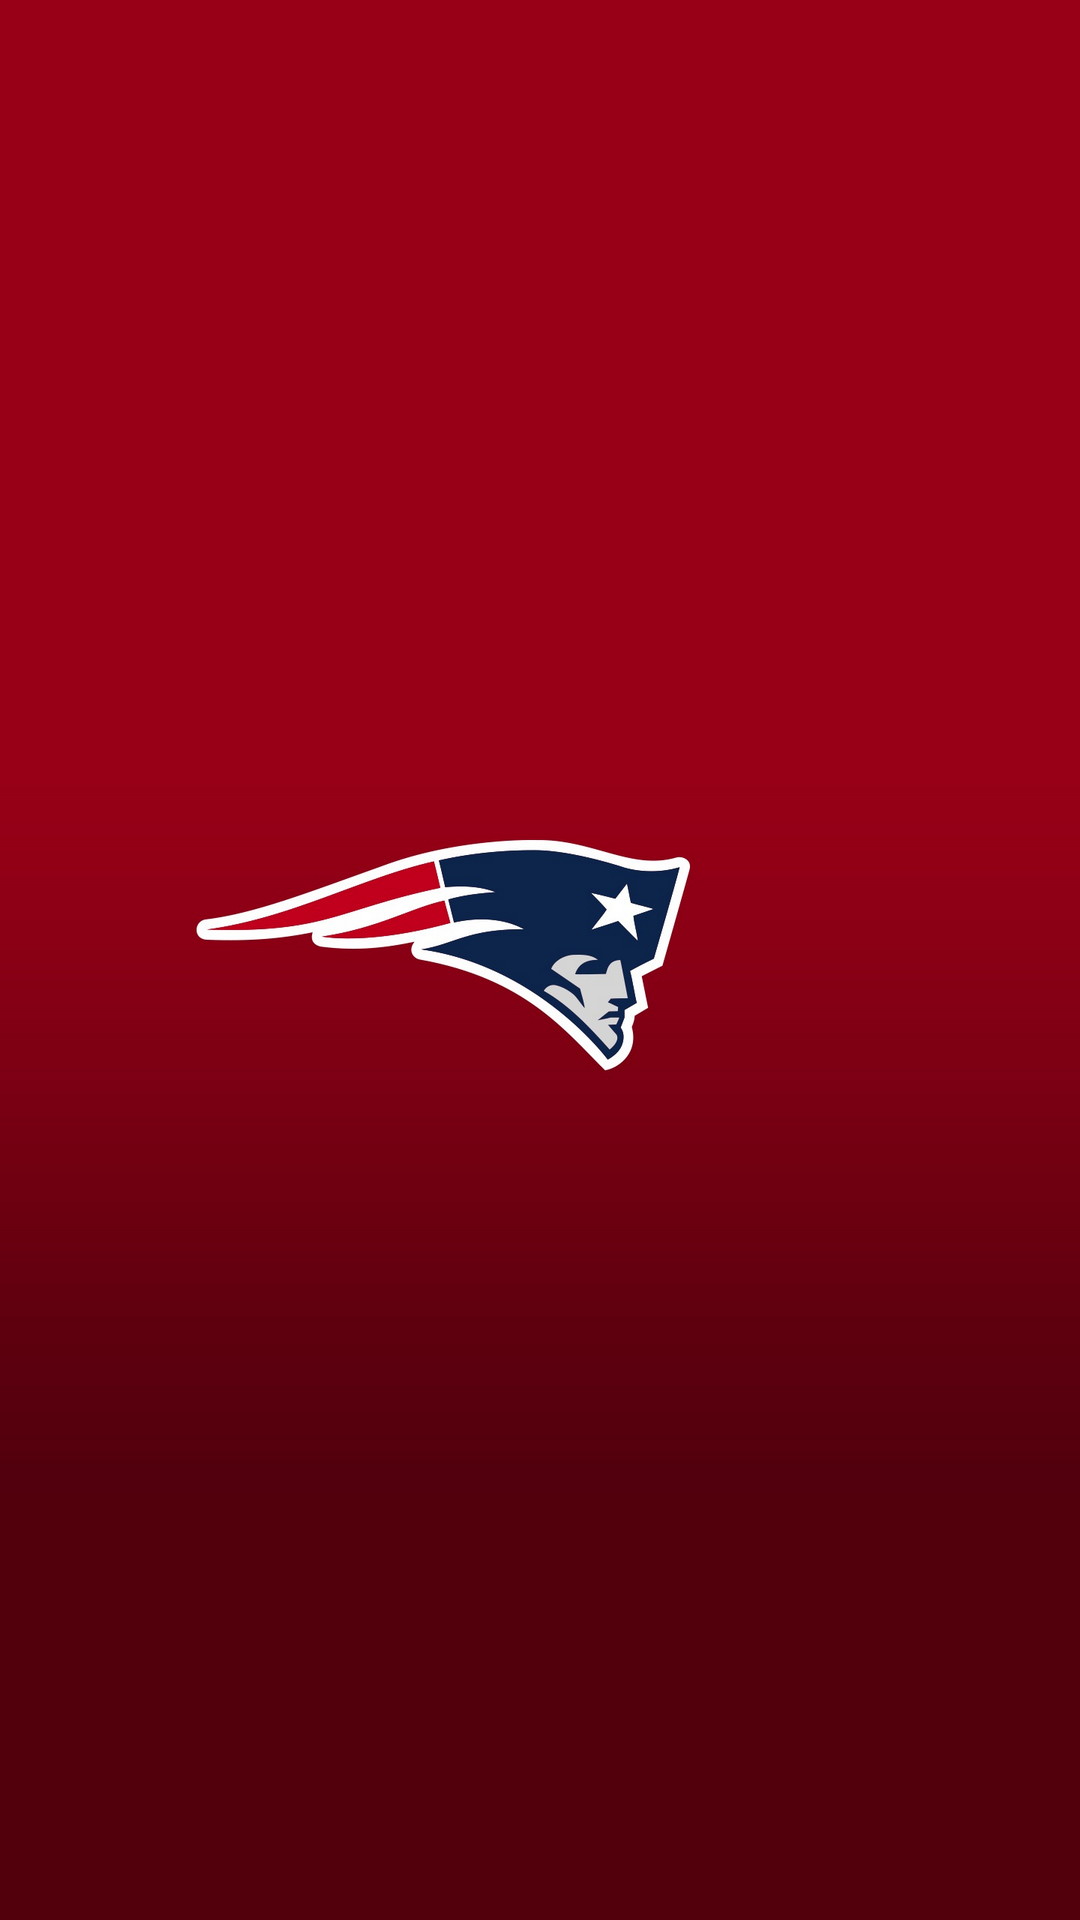 New England Patriots Wallpaper For Mobile with high-resolution 1080x1920 pixel. You can use and set as wallpaper for Notebook Screensavers, Mac Wallpapers, Mobile Home Screen, iPhone or Android Phones Lock Screen